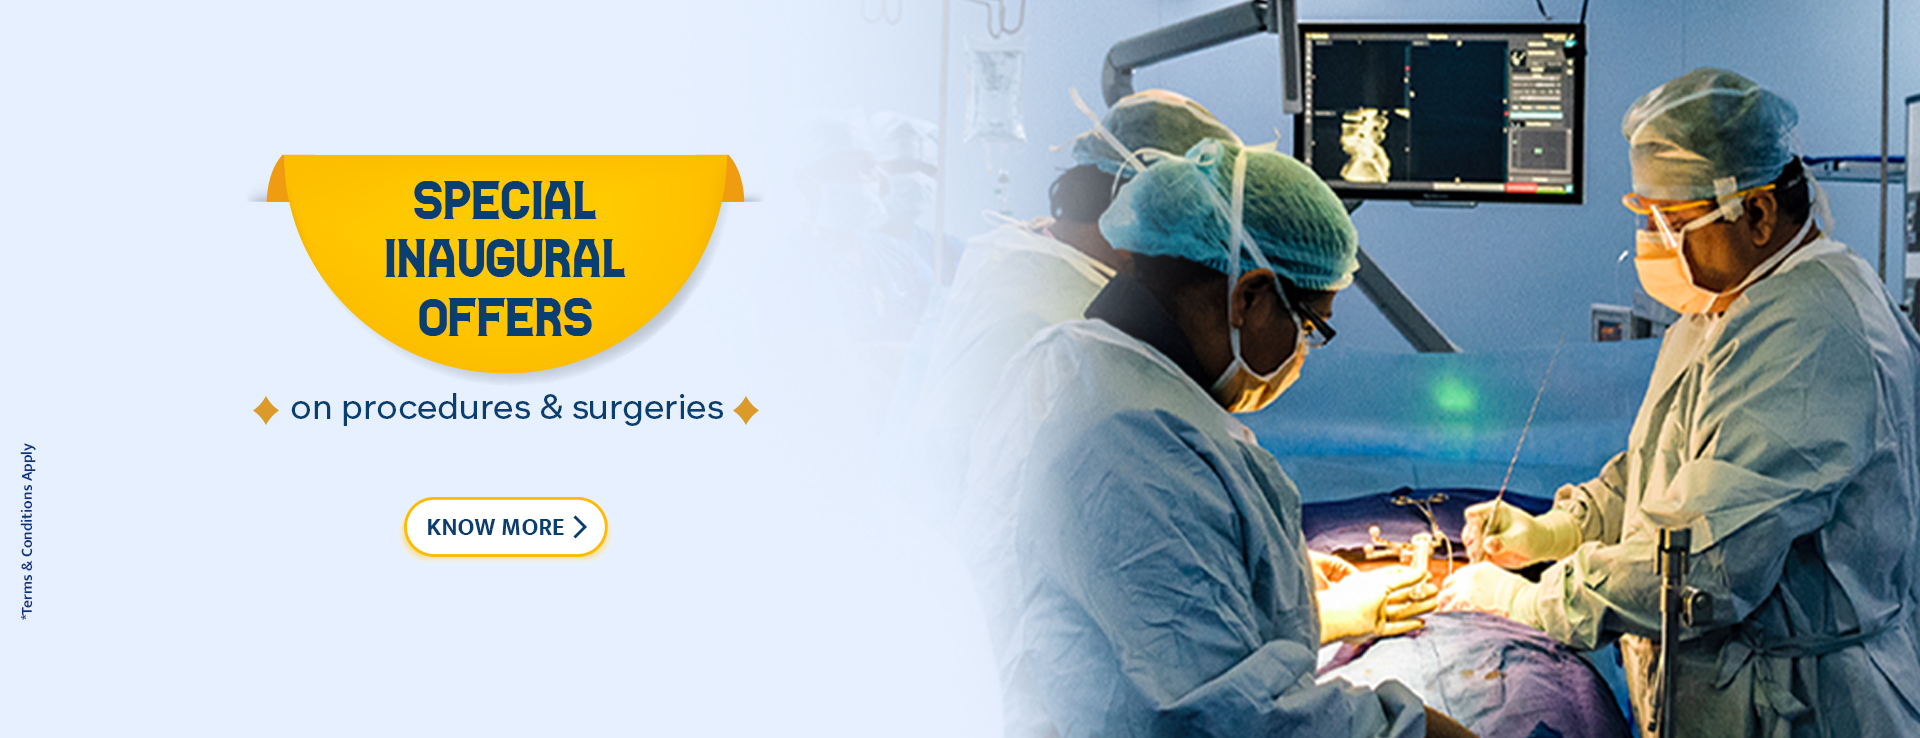 Special Inaugural Offers on procedures & surgeries